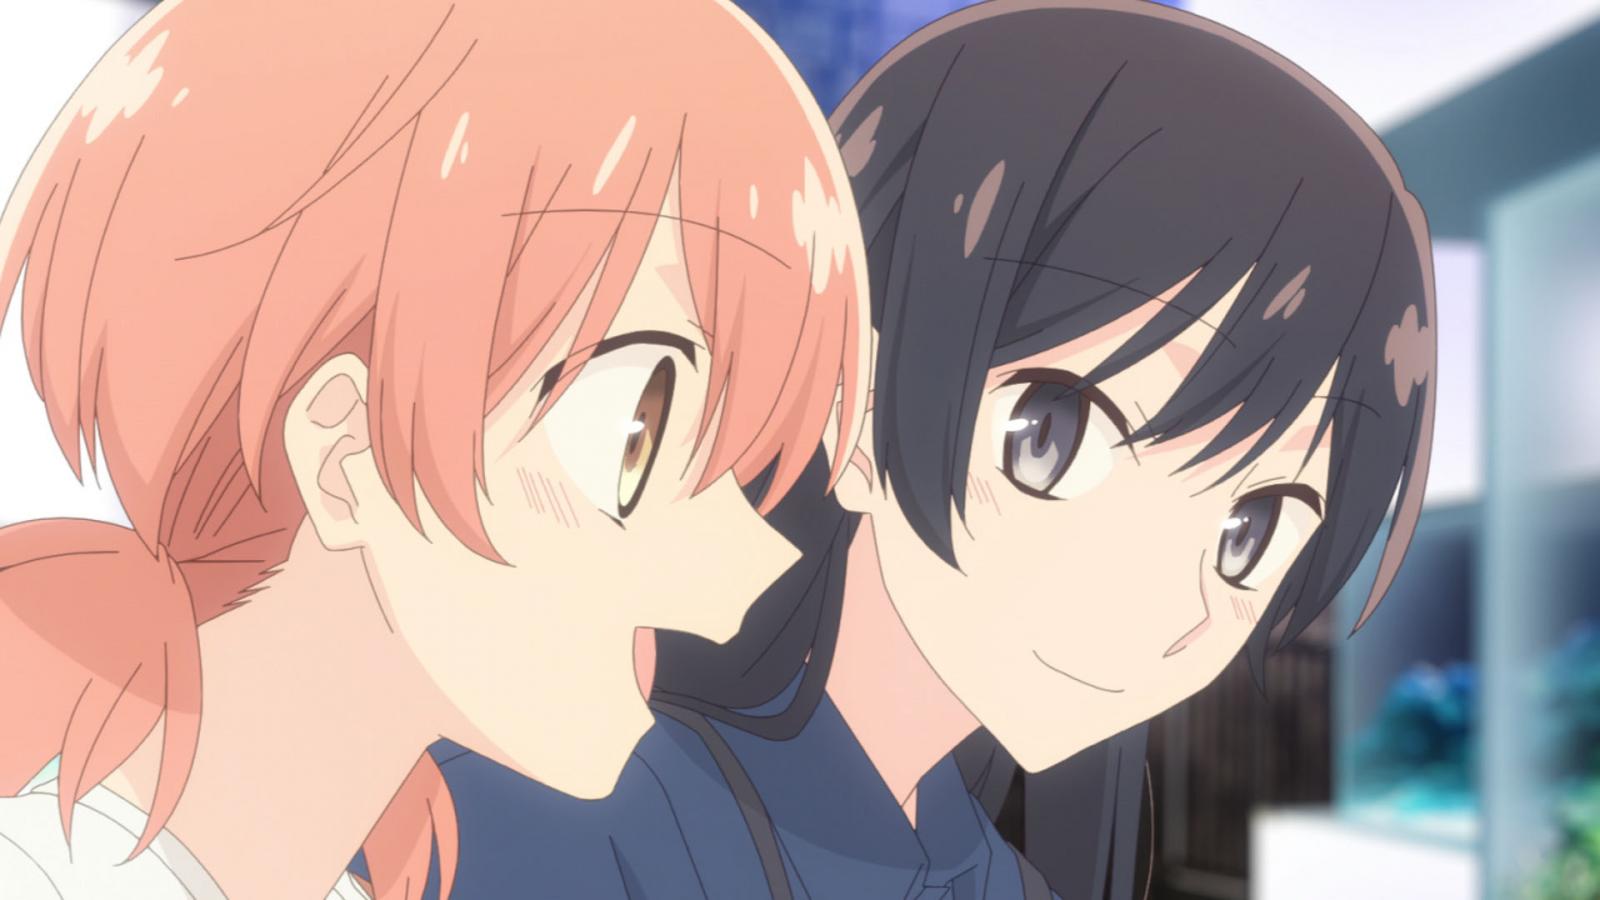 Bloom Into You - Gesamtedition - Volume 1-3: Episode 01-13 [Blu-ray] Image 5